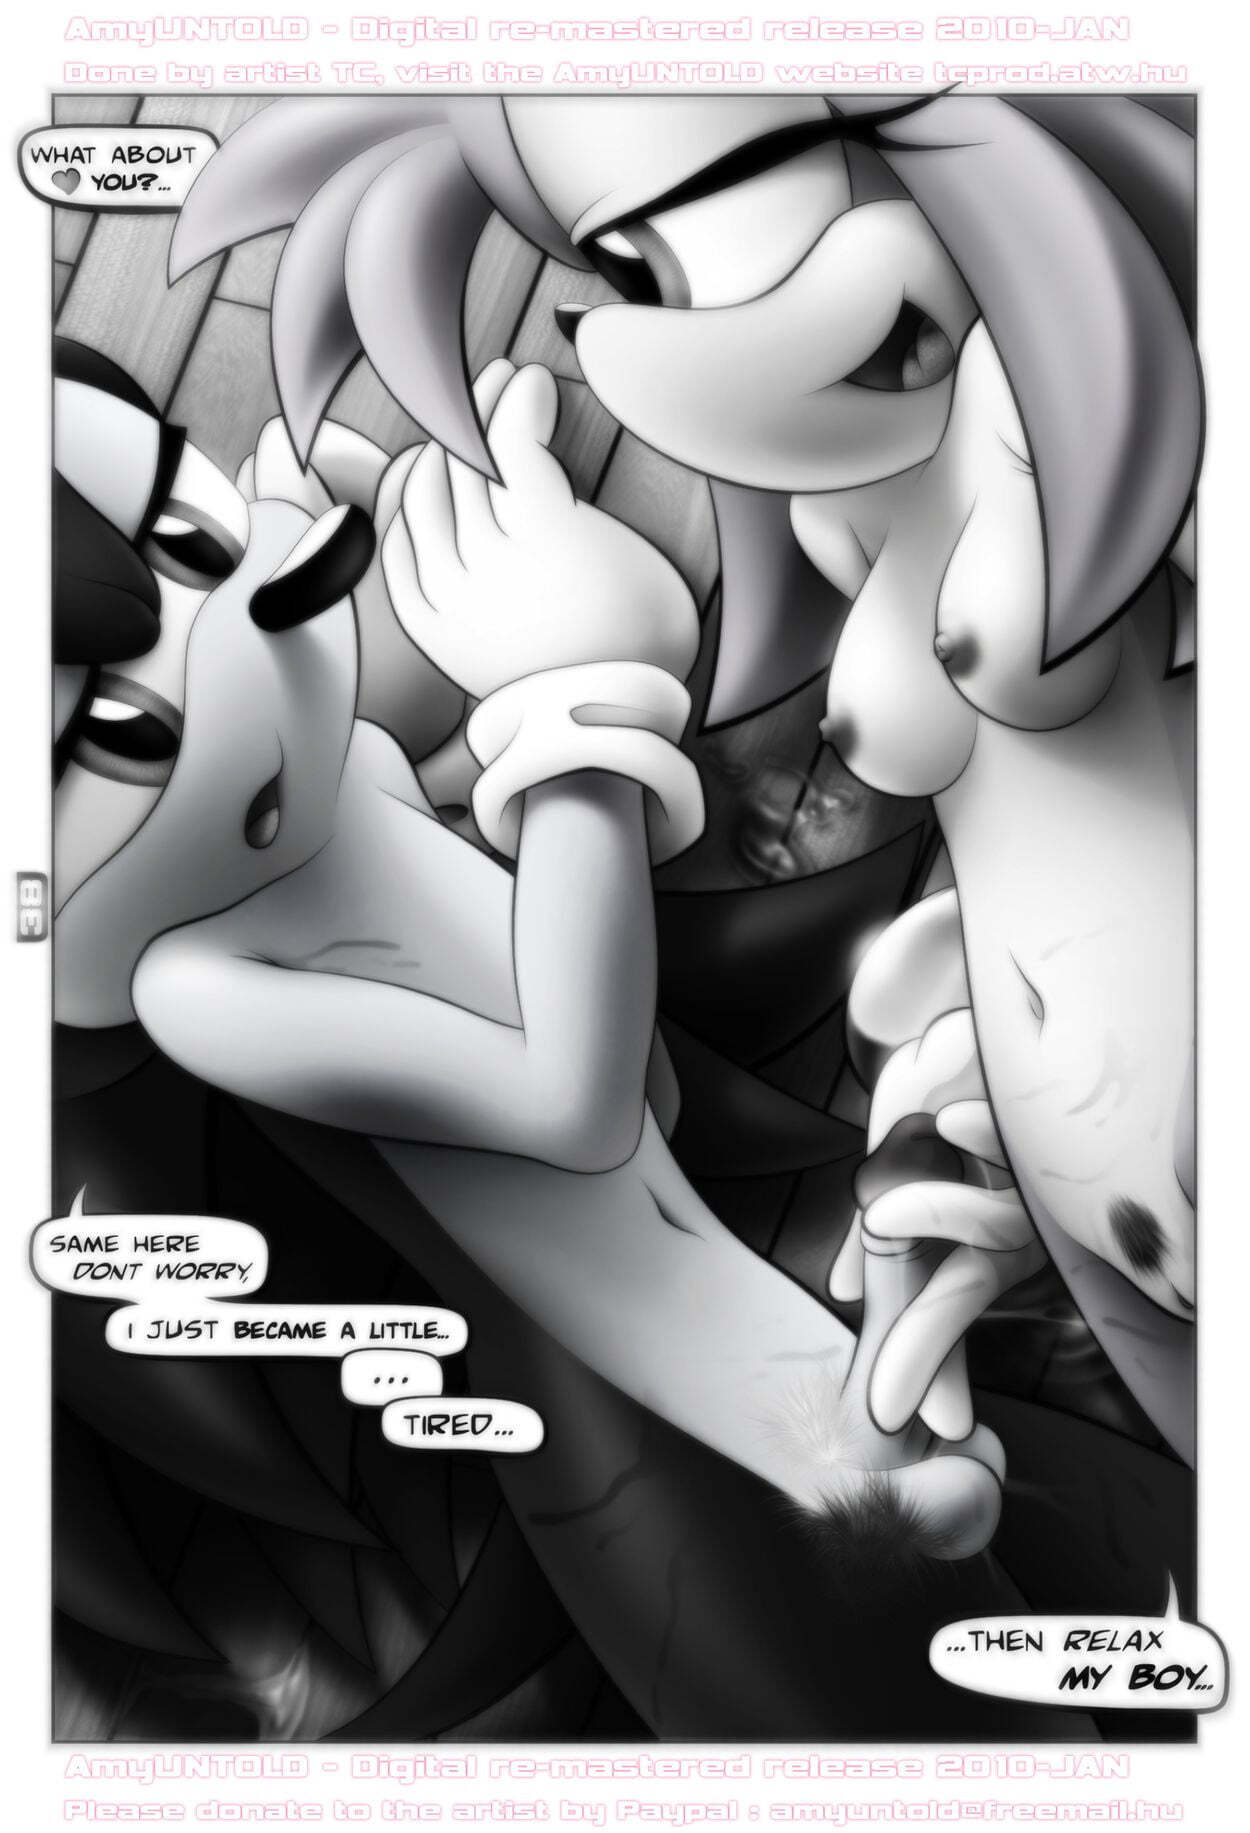 Amy Untold - Finally - Page 38